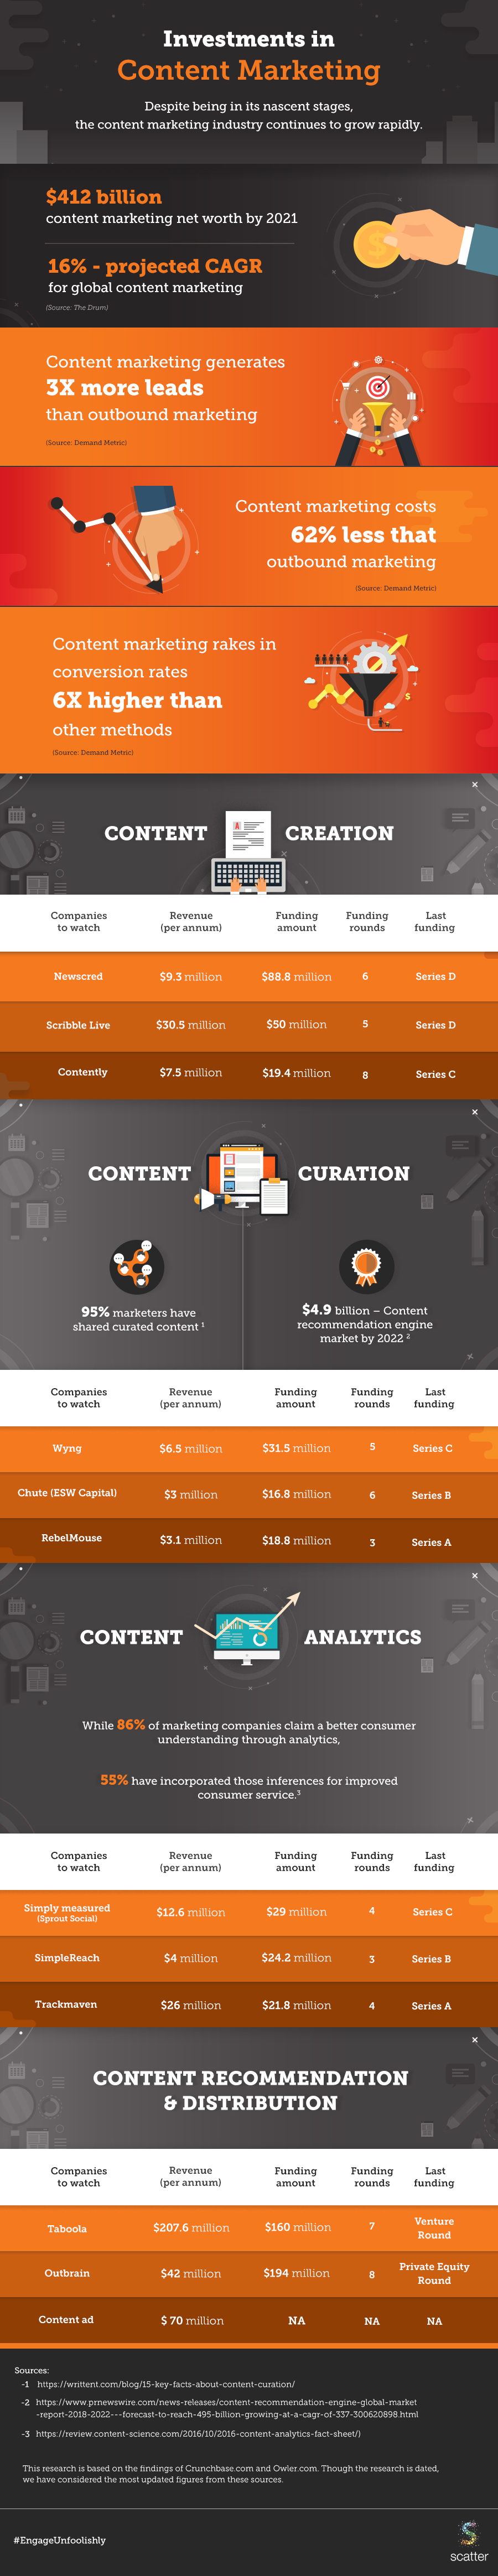 The content marketing investment landscape has been a maze of competing ideas. It's time investors know which of its segments bring in the most revenue. So here's an infographic that is a one stop shop for all things related to content market trends, top billing companies and consumer preferences.